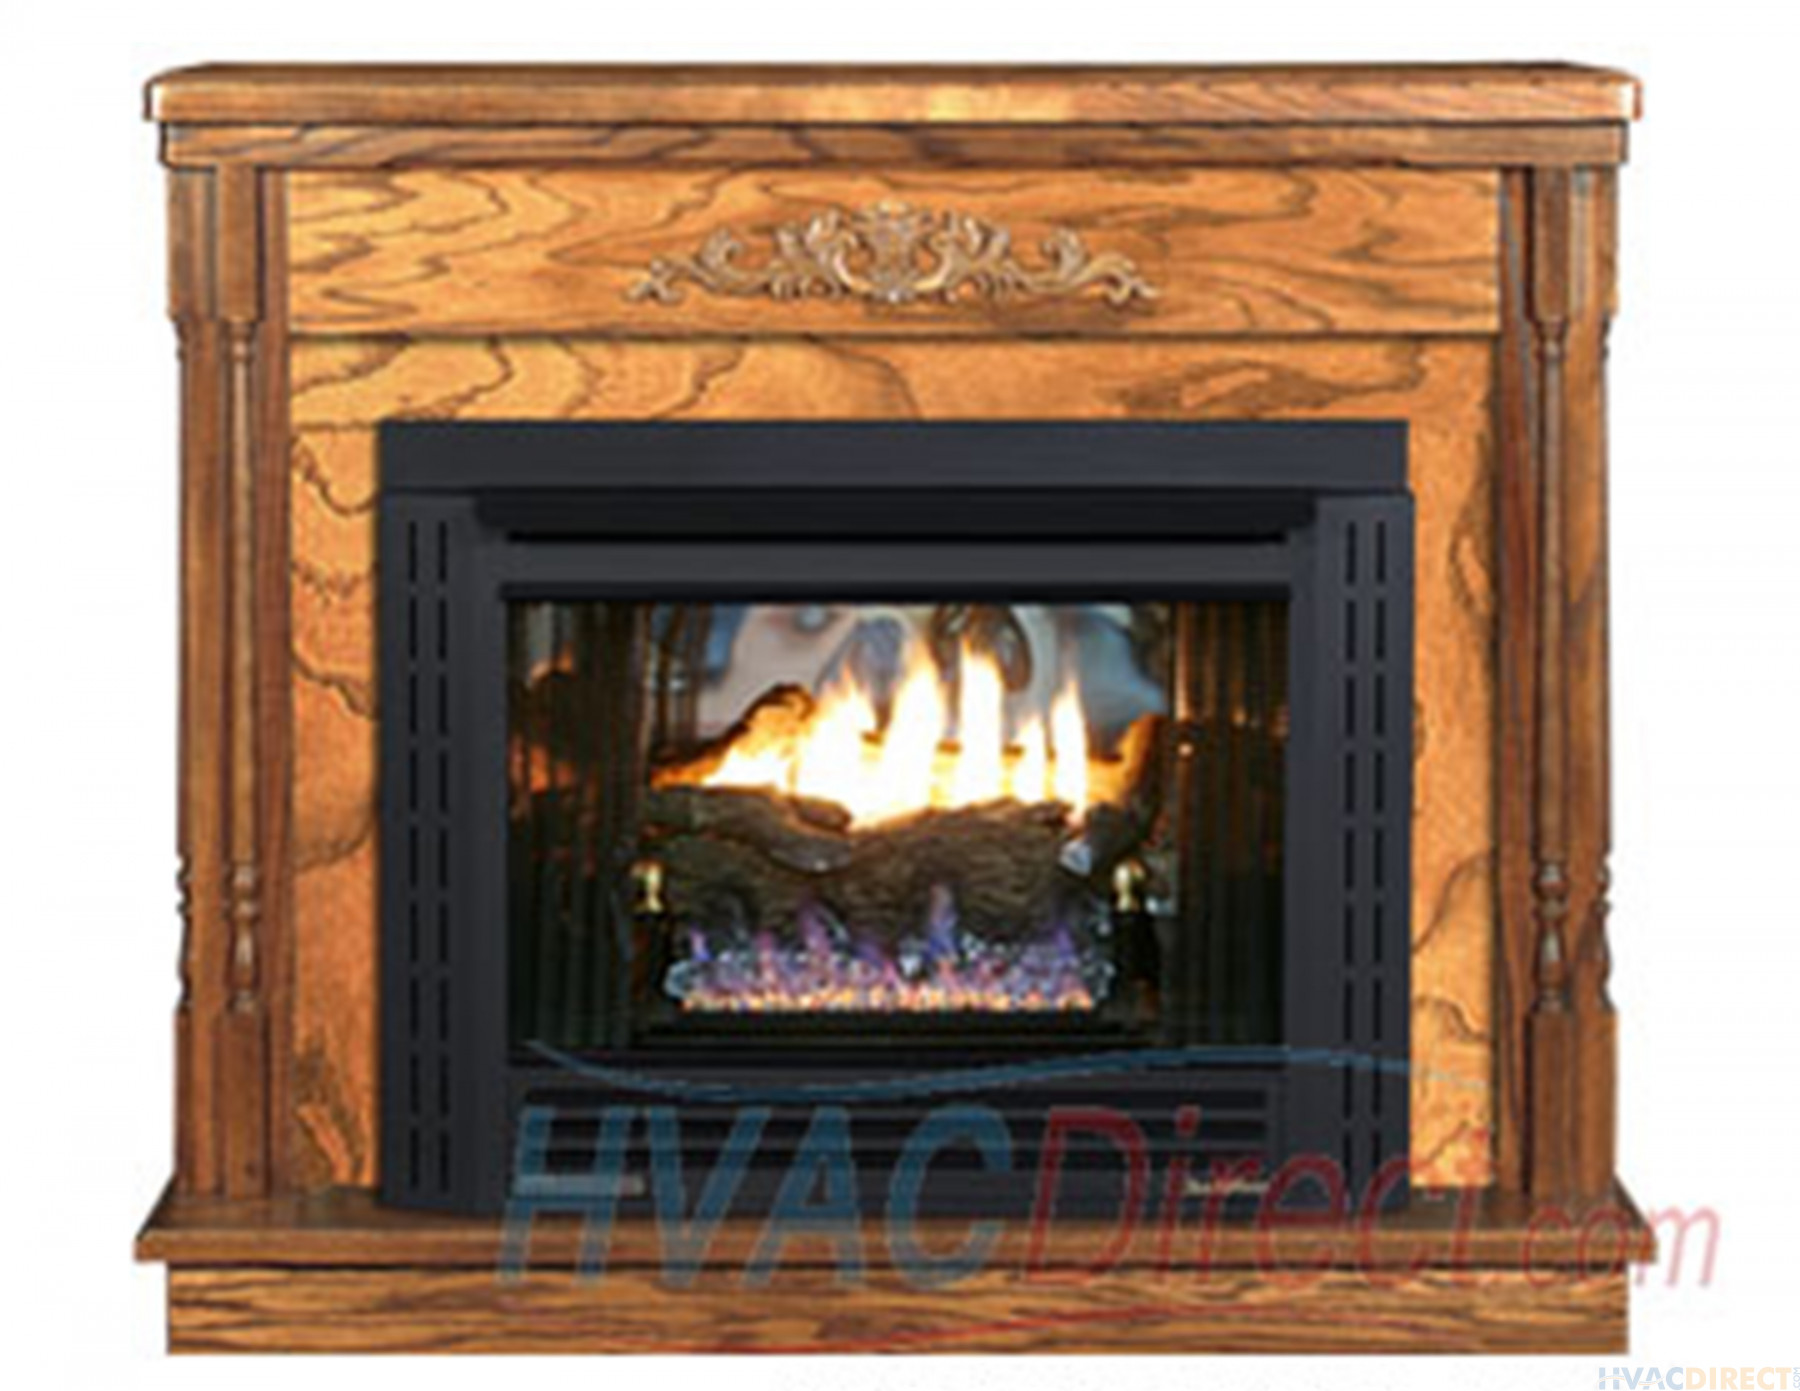 Cheap Electric Fireplaces Clearance Lovely Buck Stove Model 34zc Zero Clearance Vent Free Gas Fireplace